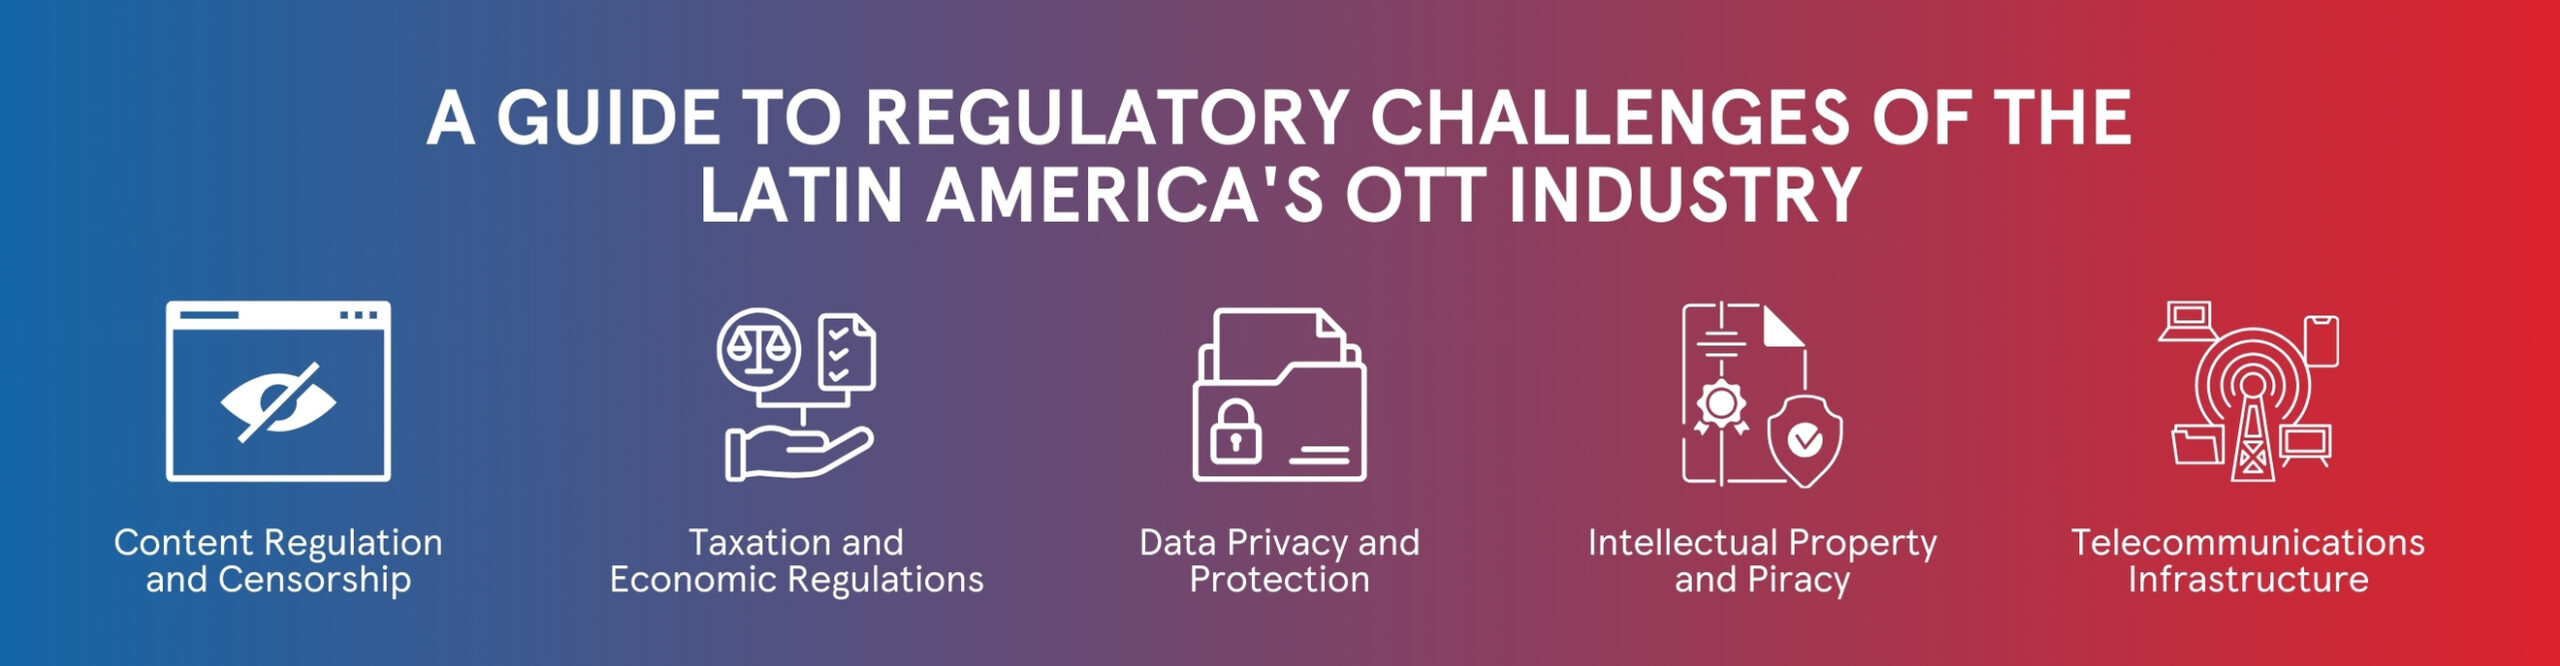 http://magnaquest.com/wp-content/uploads/2024/05/A-Guide-to-Regulatory-Challenges-of-the-Latin-Americas-OTT-Industry-scaled.jpg